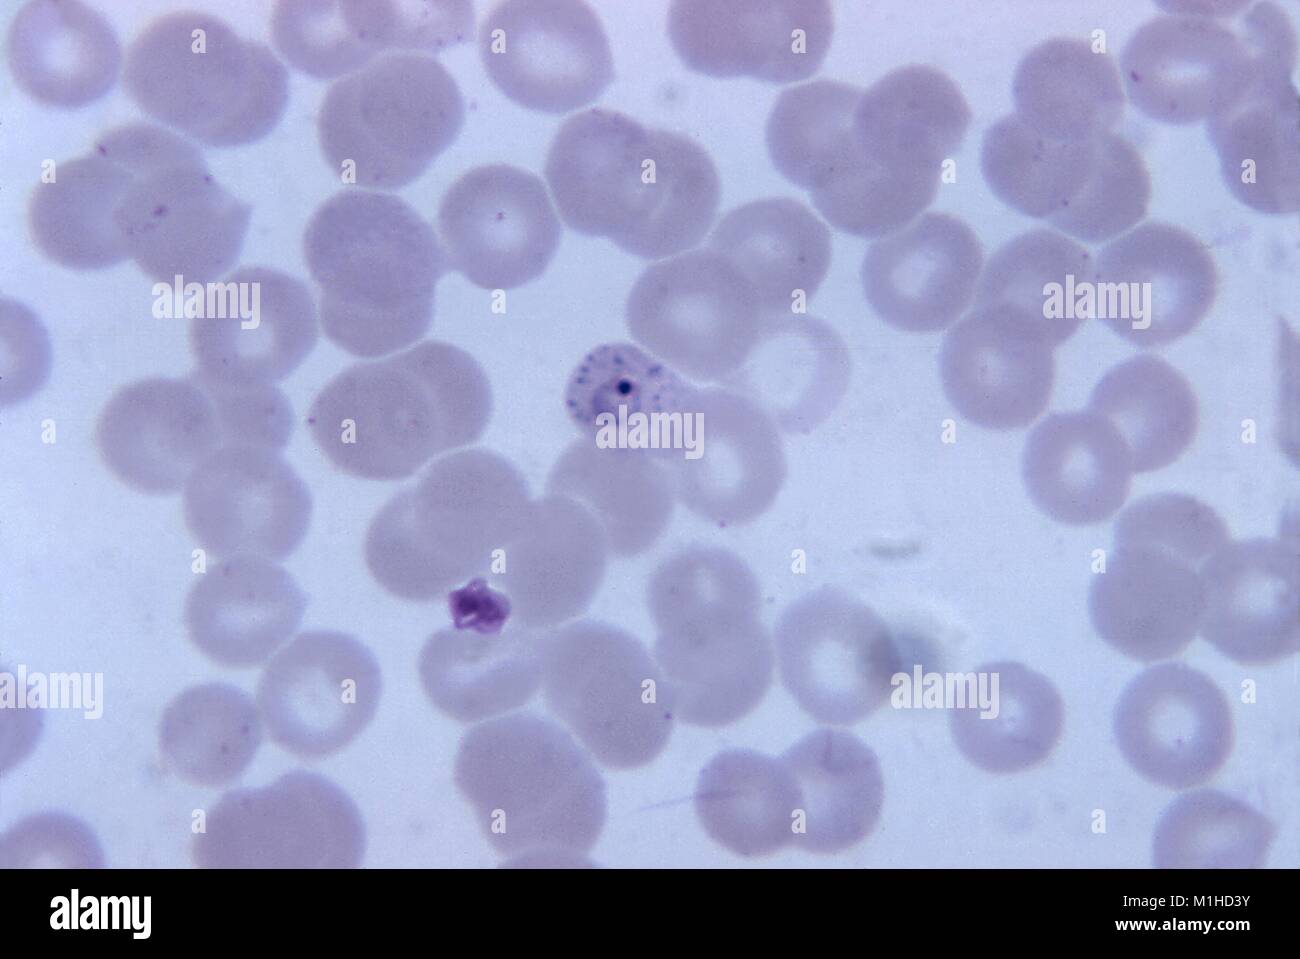 Plasmodium Vivax Inside Red Blood Cell In The Stage Of Ringform Trophozoite  Stock Photo - Download Image Now - iStock